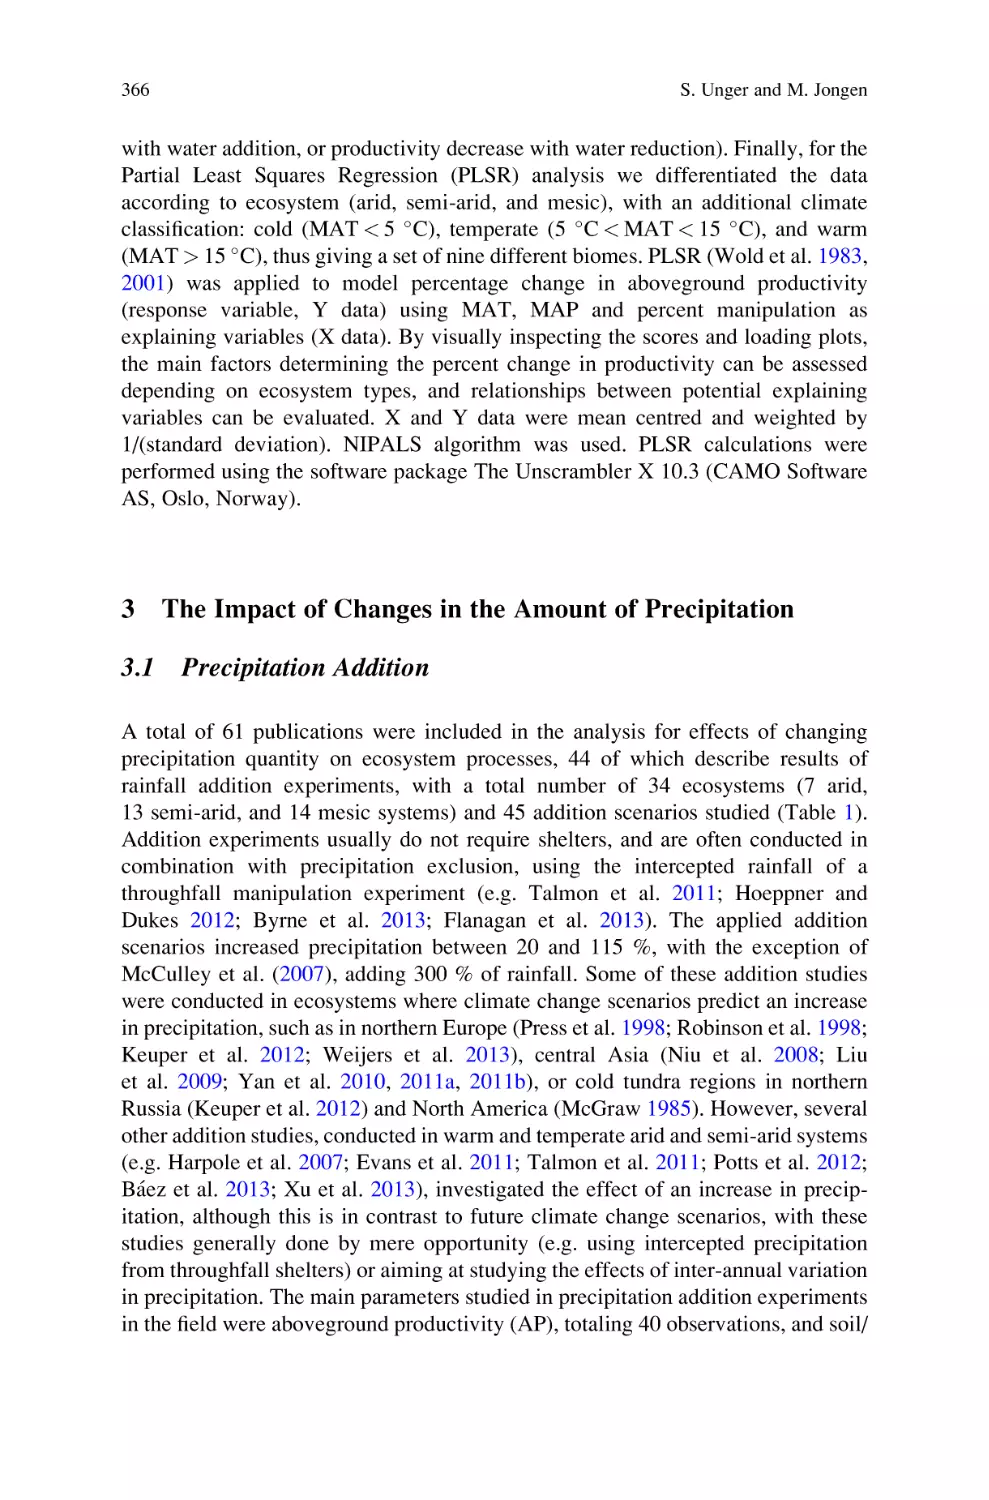 3 The Impact of Changes in the Amount of Precipitation
3.1 Precipitation Addition